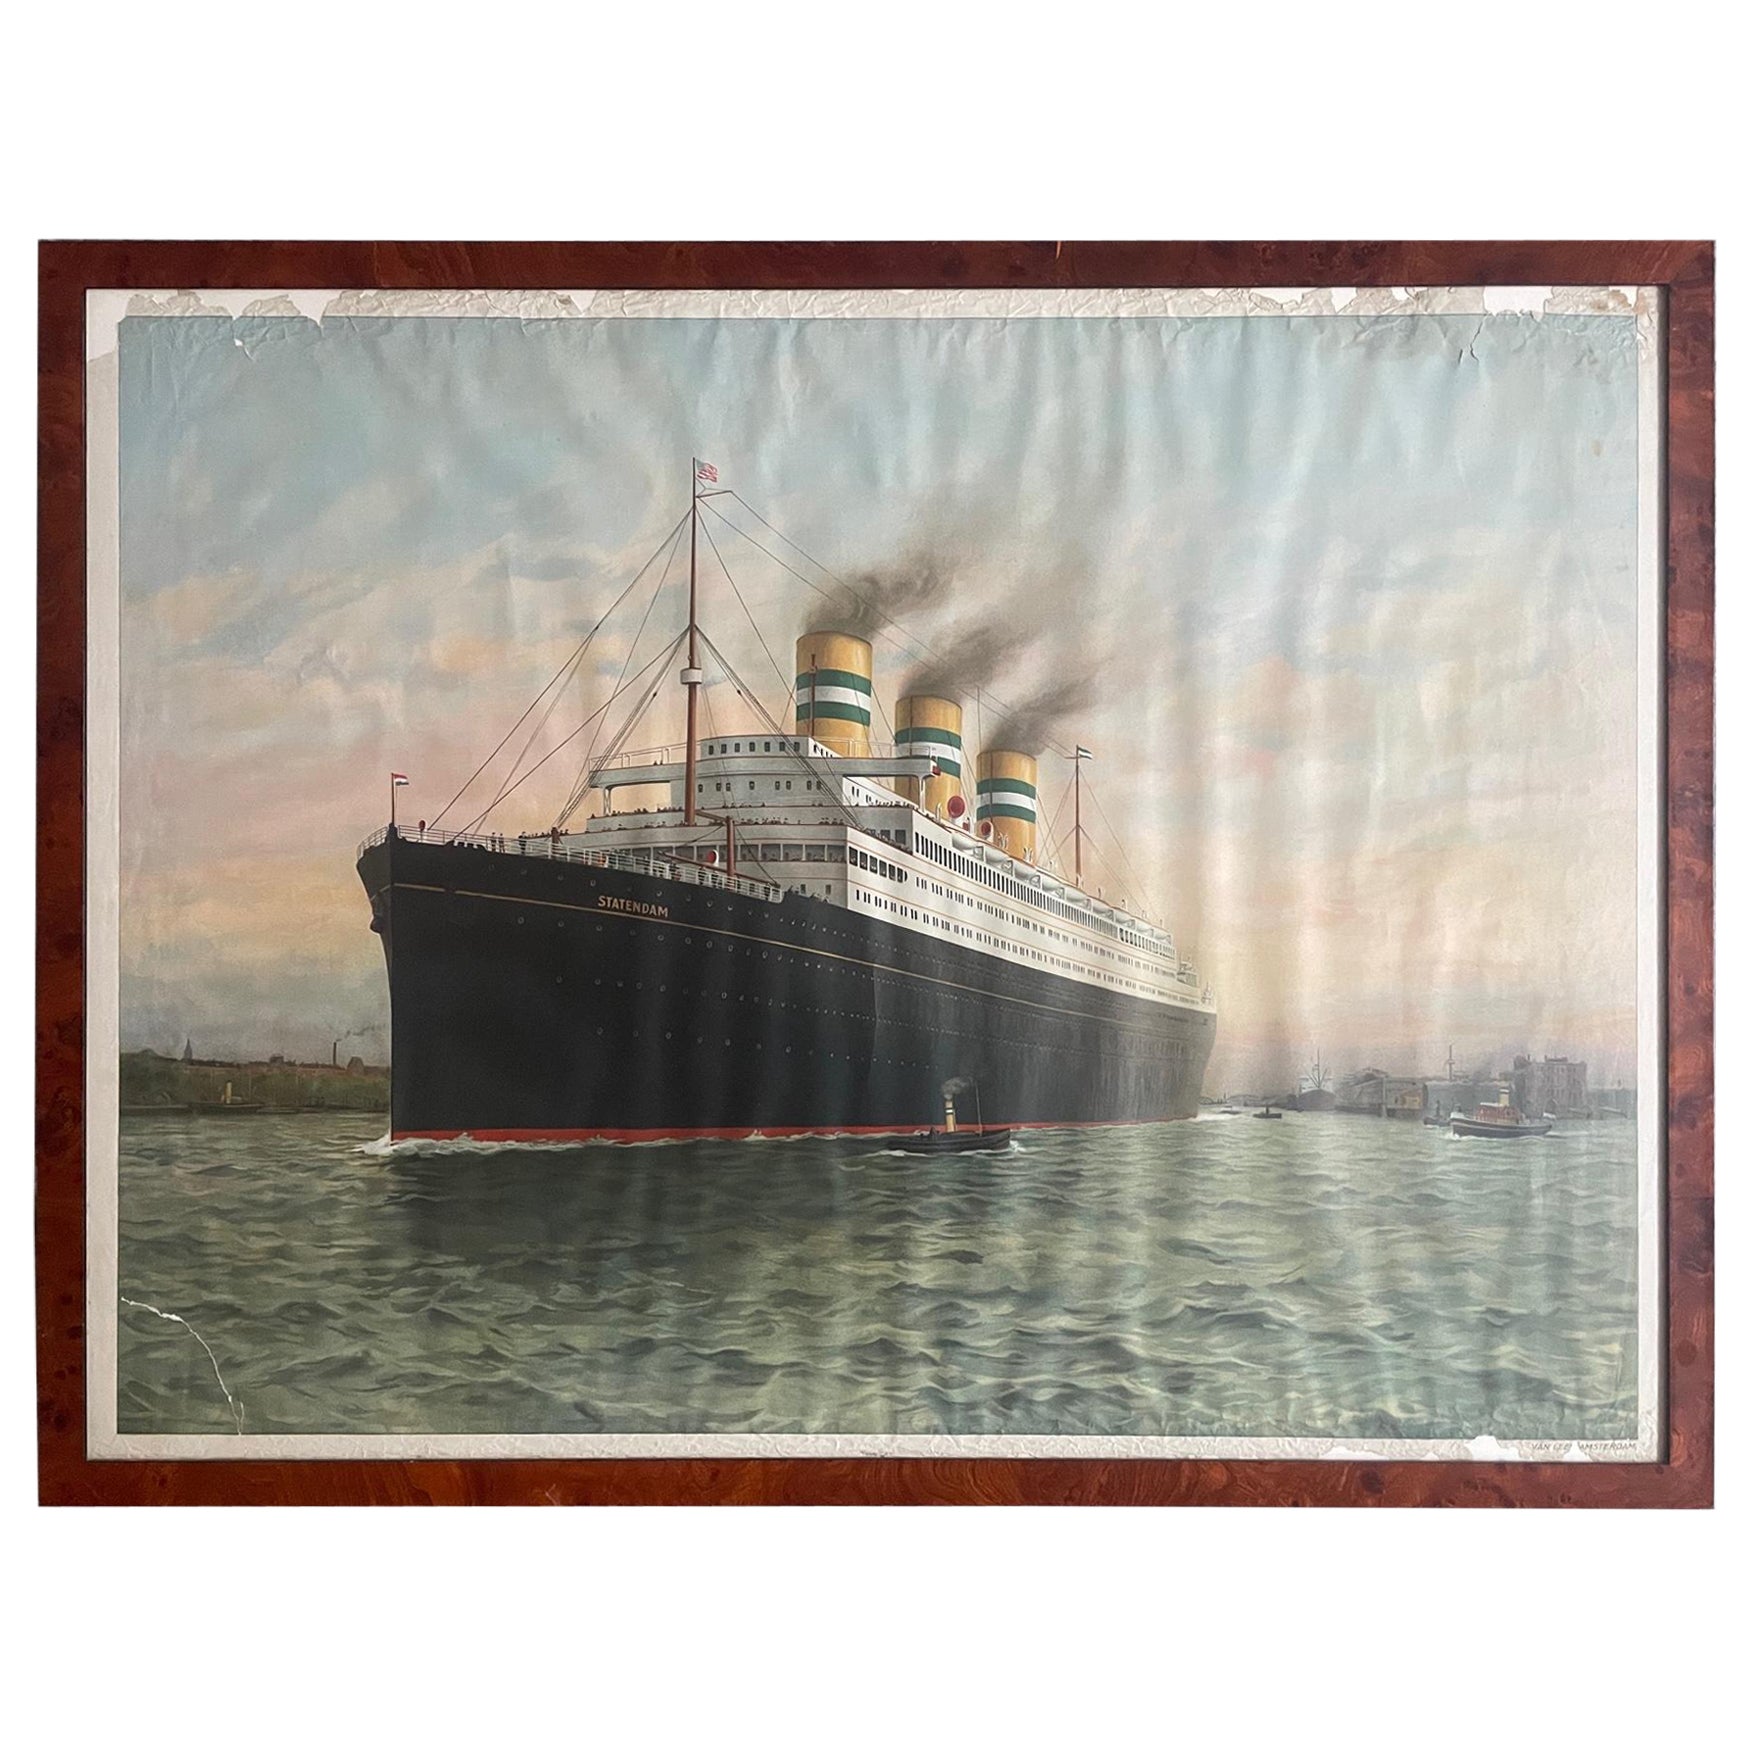 Vintage Holland America Line Poster from Van Leer, 1930s, Affiche Statendam 30s For Sale